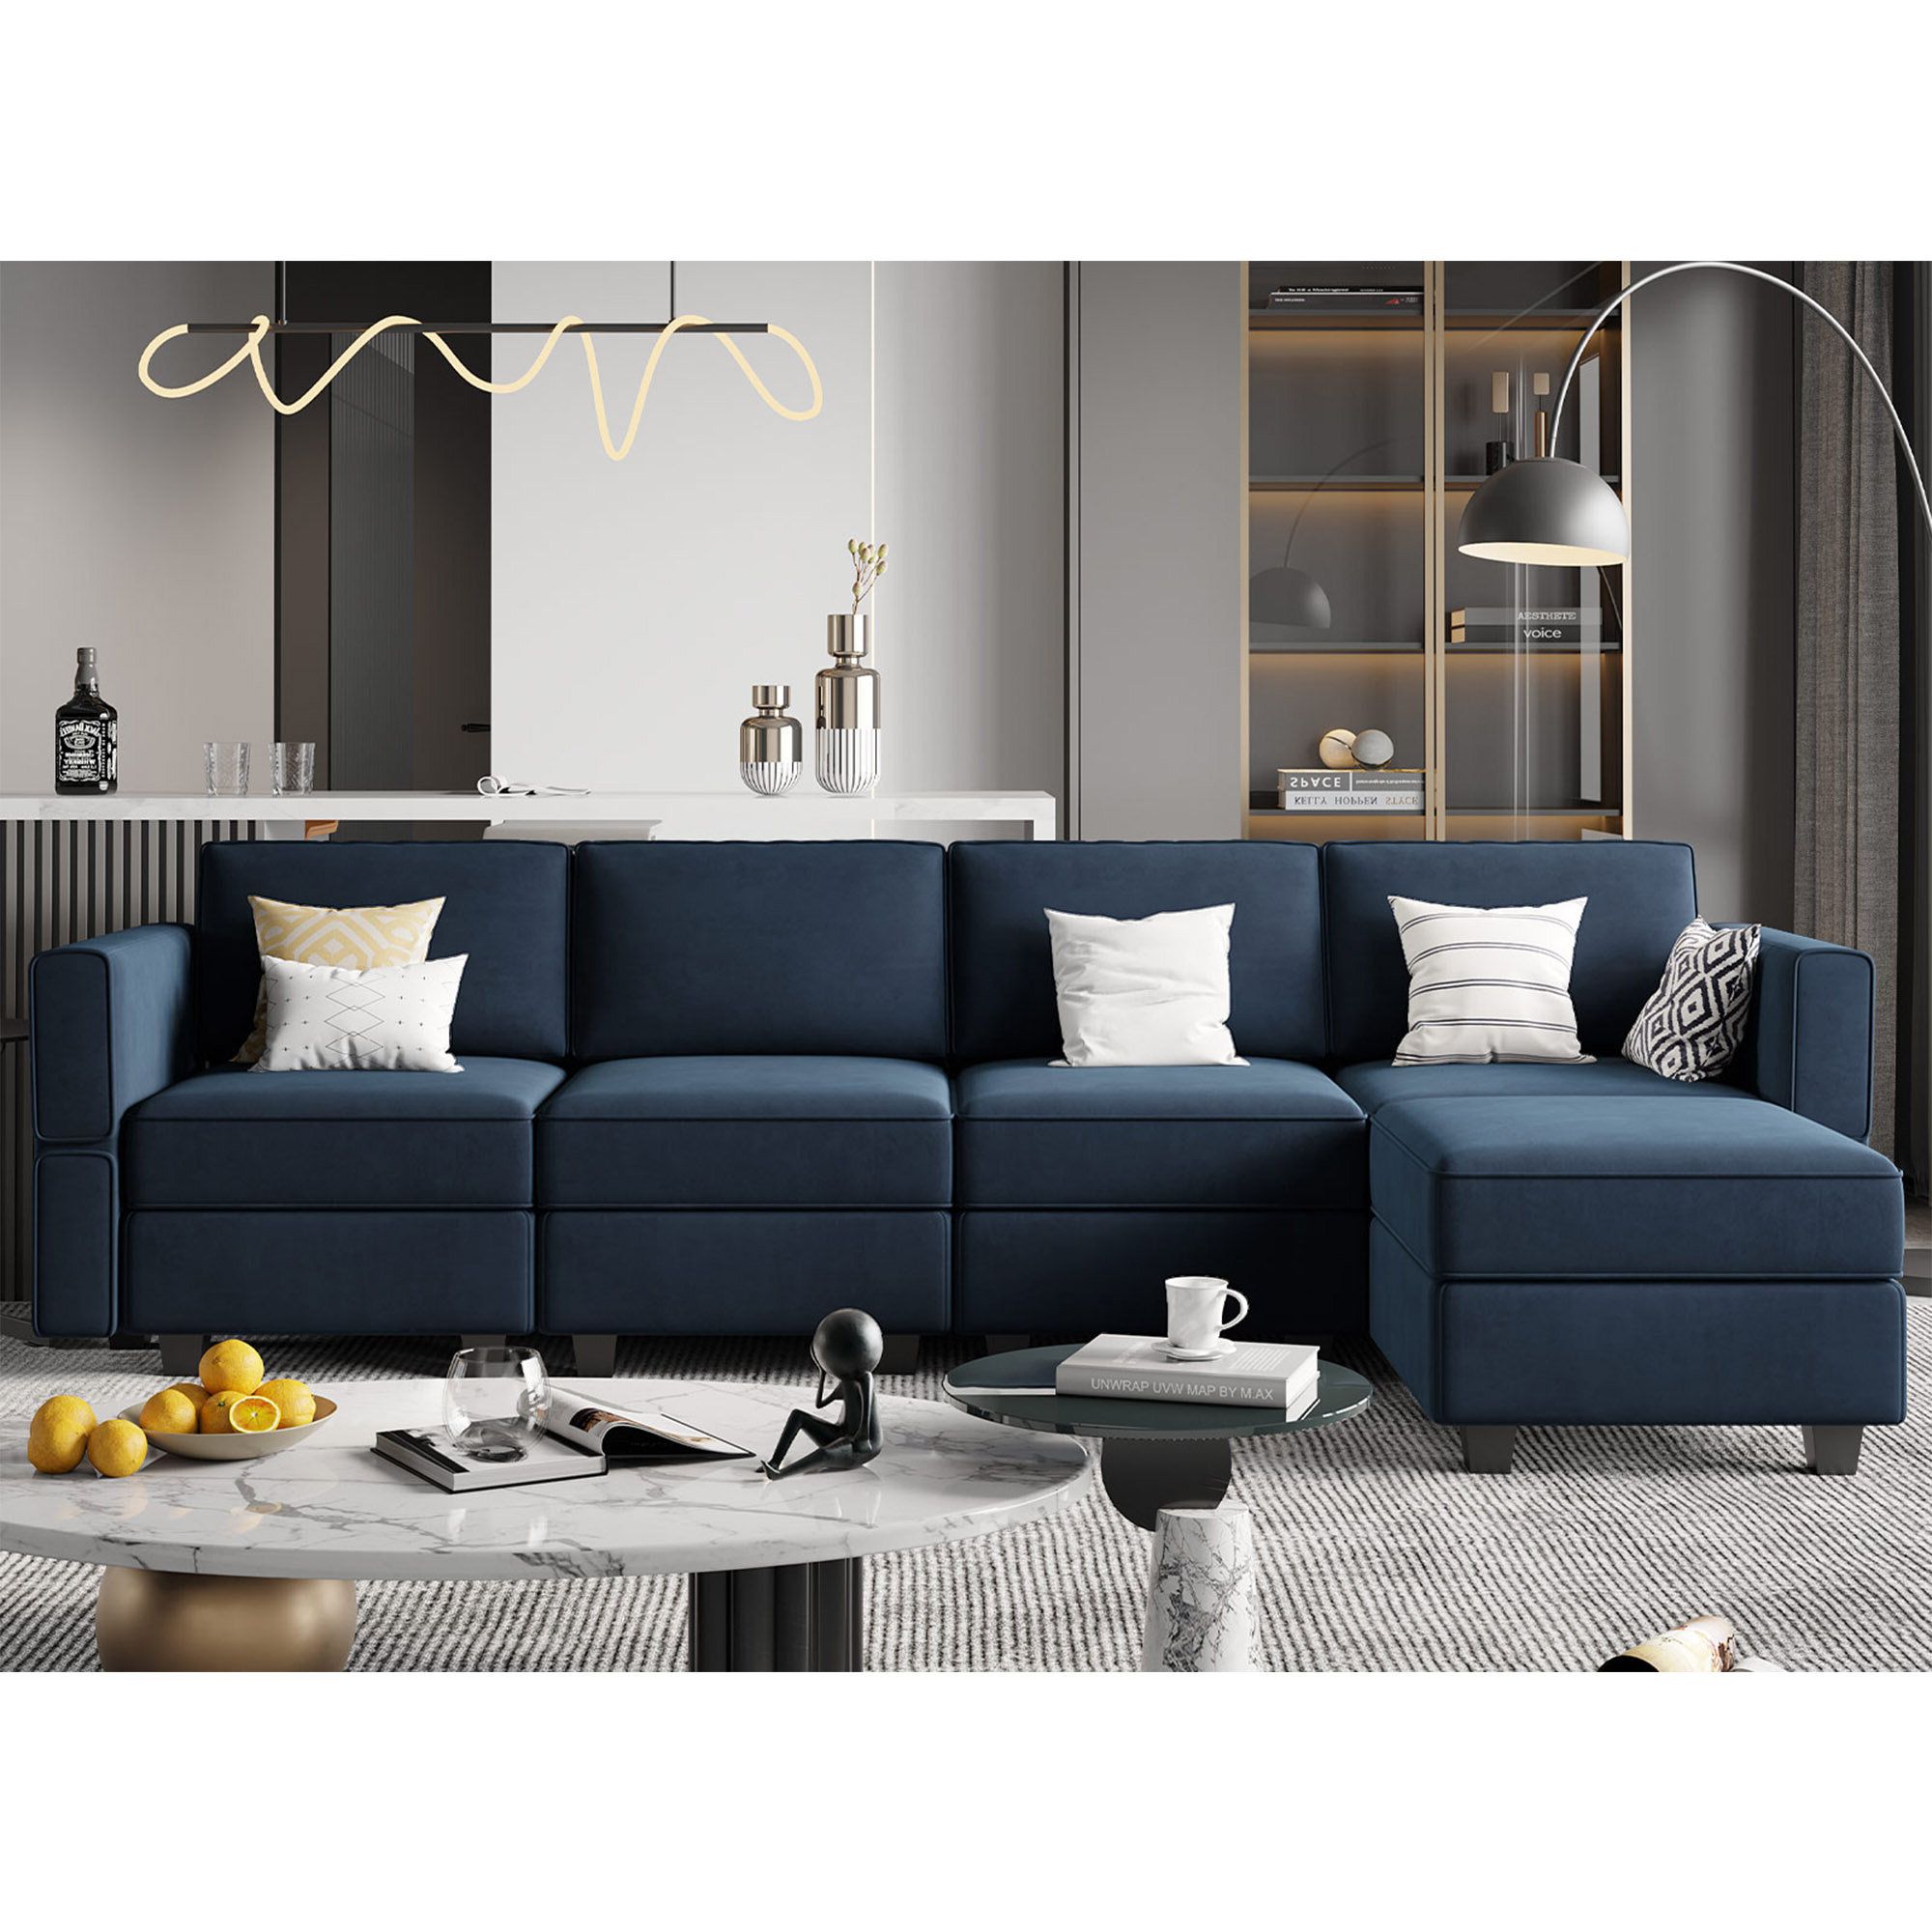 Latitude Run® Teangela 116.6'' Upholstered Sectional Sofa With Storage &  Reviews | Wayfair Within Upholstered Modular Couches With Storage (Gallery 1 of 20)